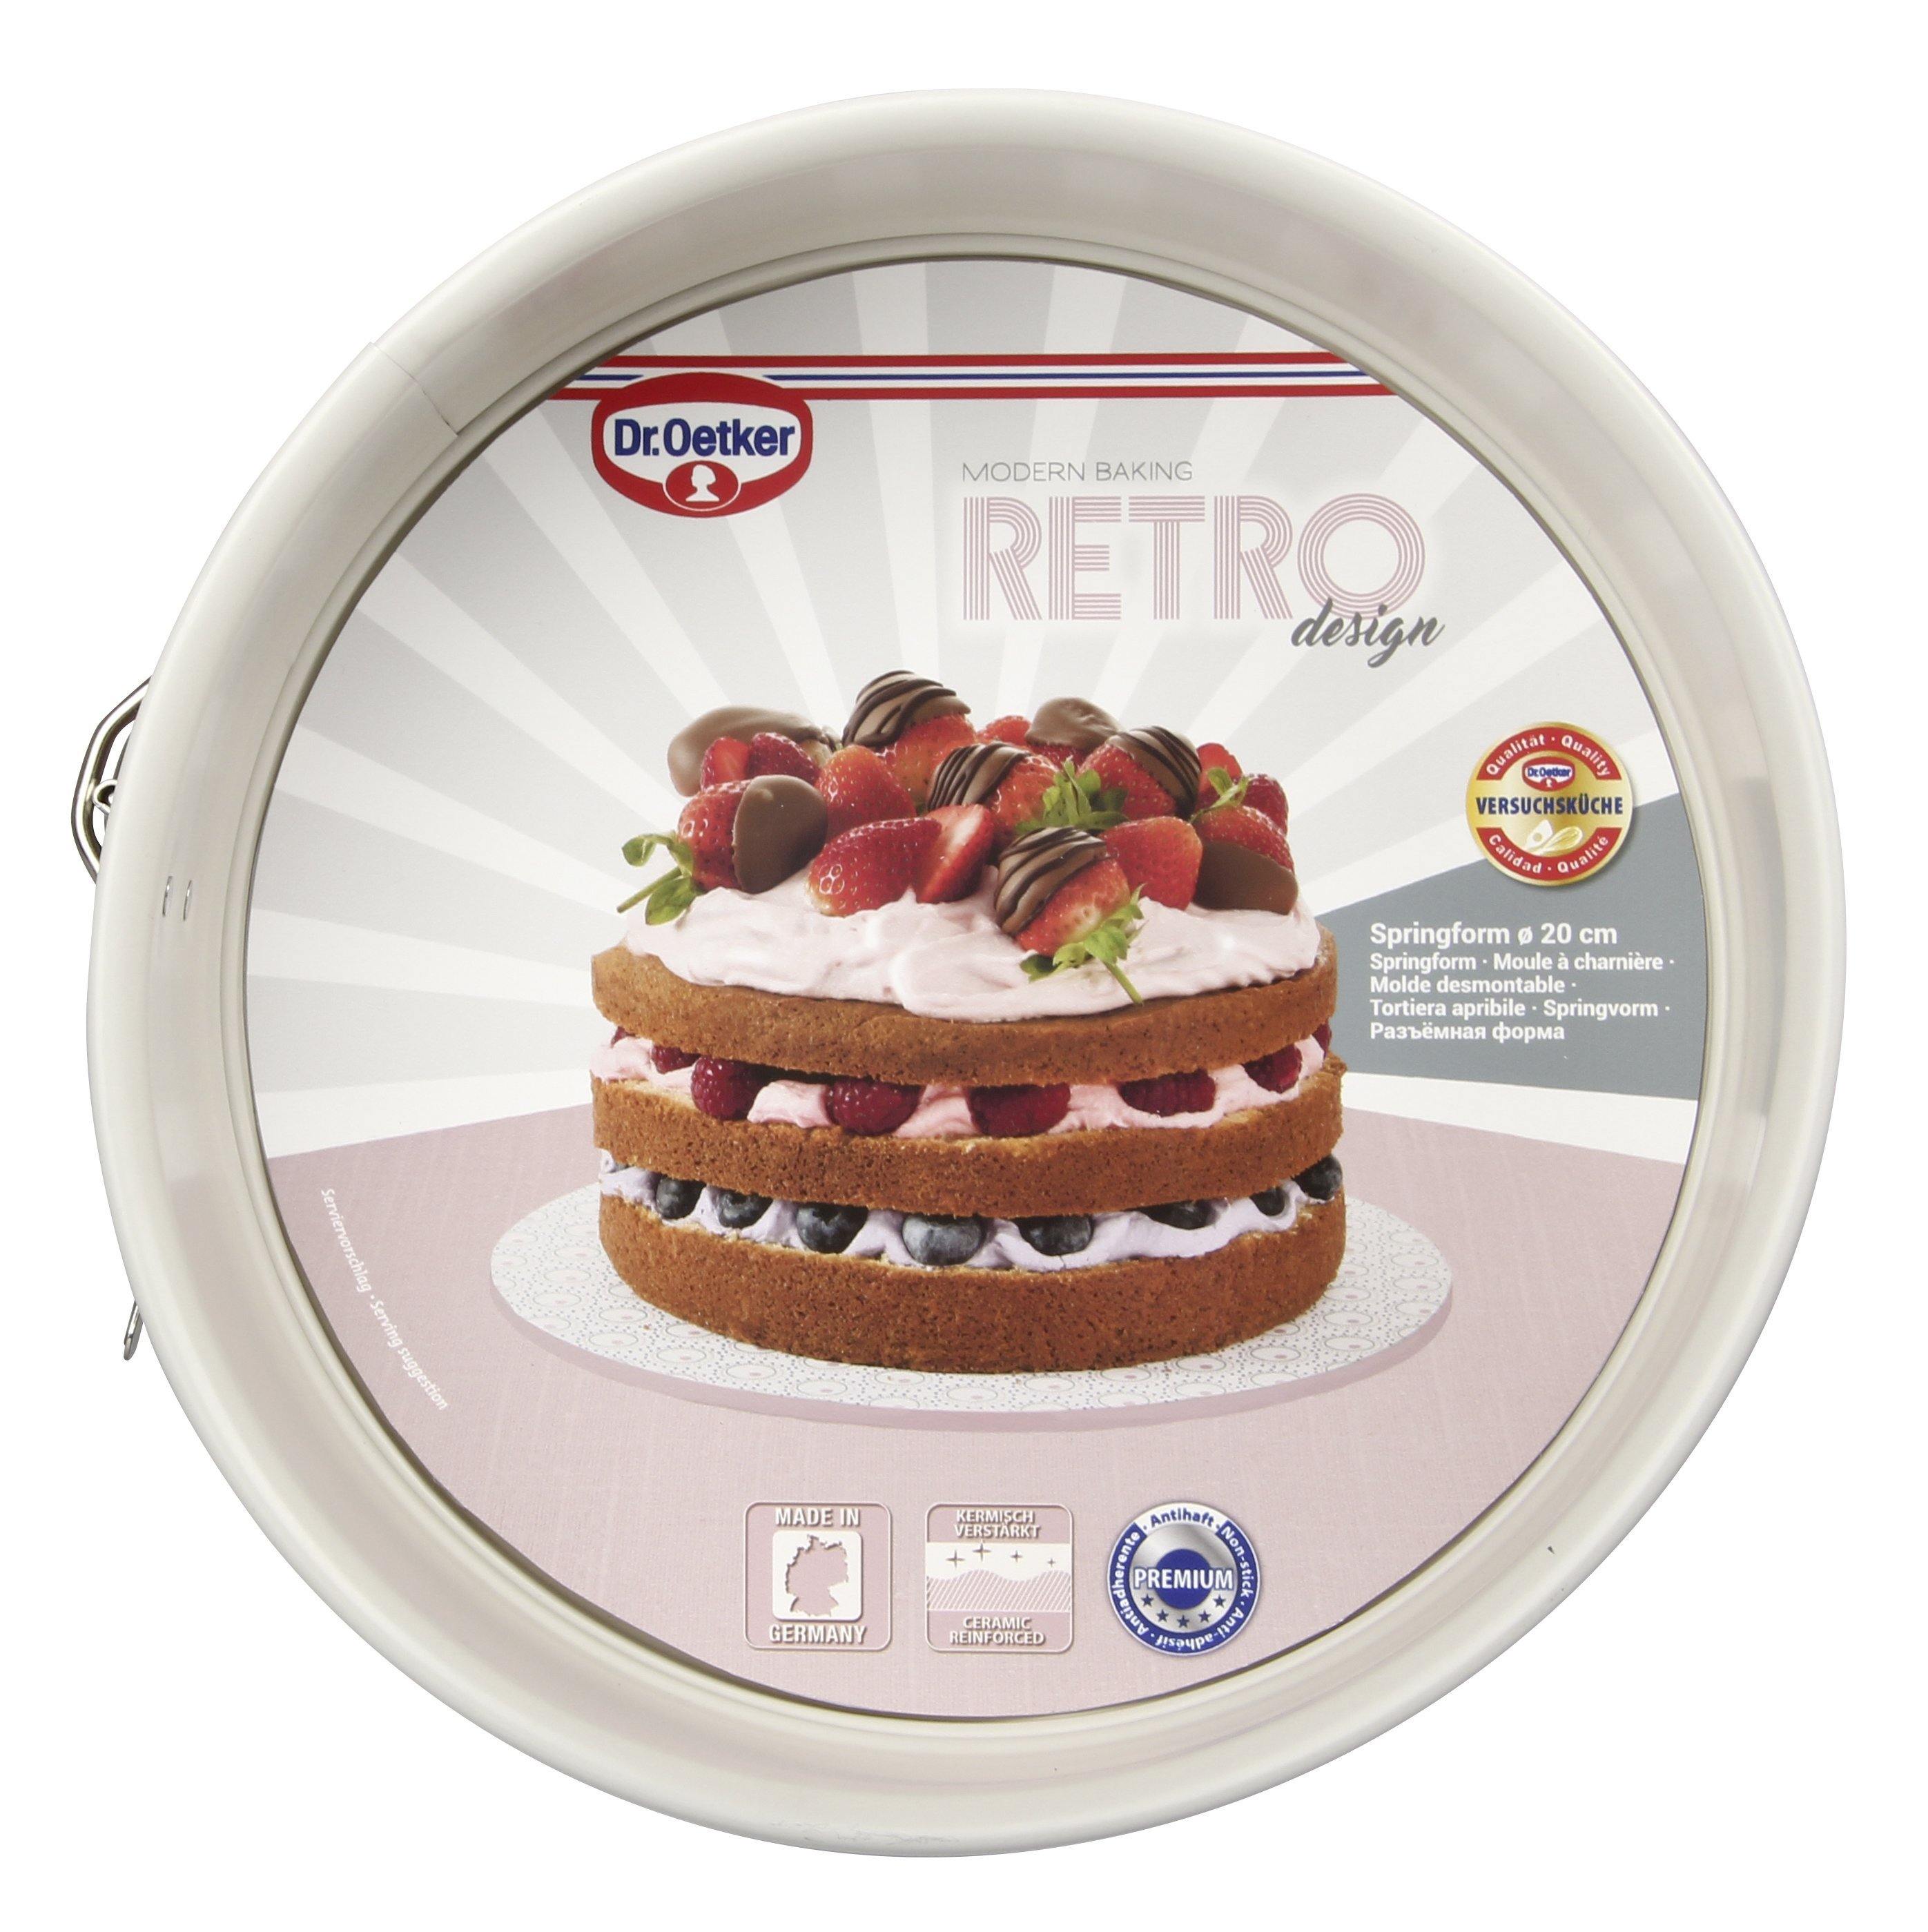 Dr. Oetker "Retro" Springform Steel Plate With Ceramic Reinforced Non-Stick Coating, Rose/CrÃ¨me, 20X7 Cm - Whole and All